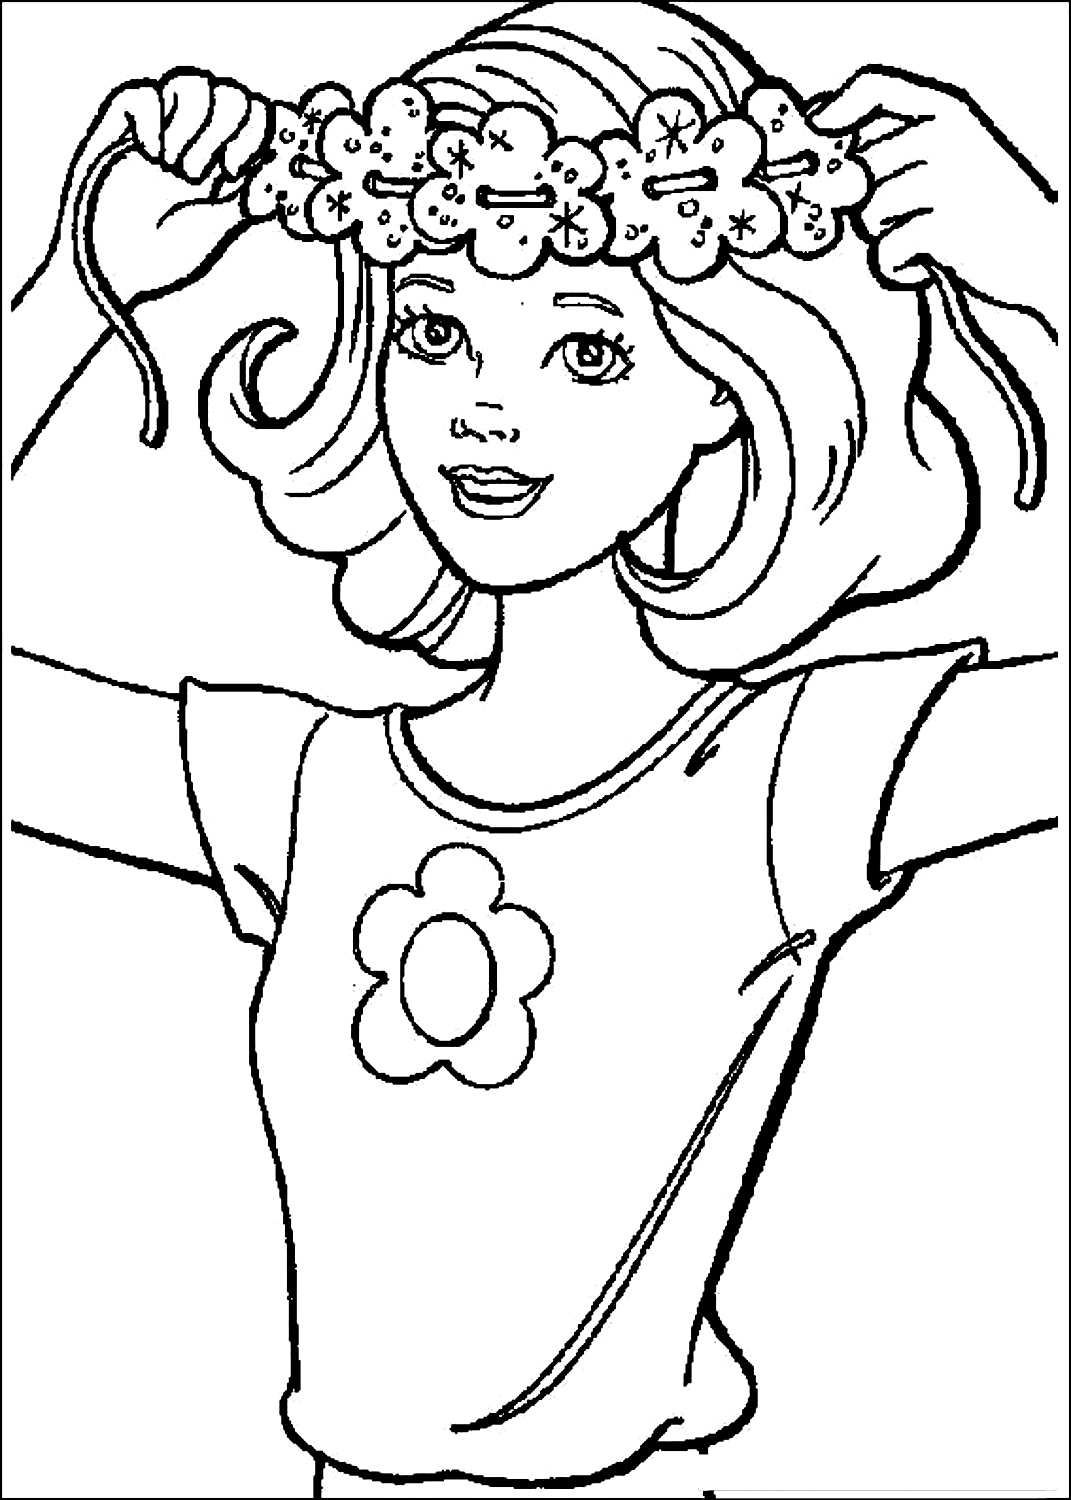 Drawing 26 from Barbie to print and coloring